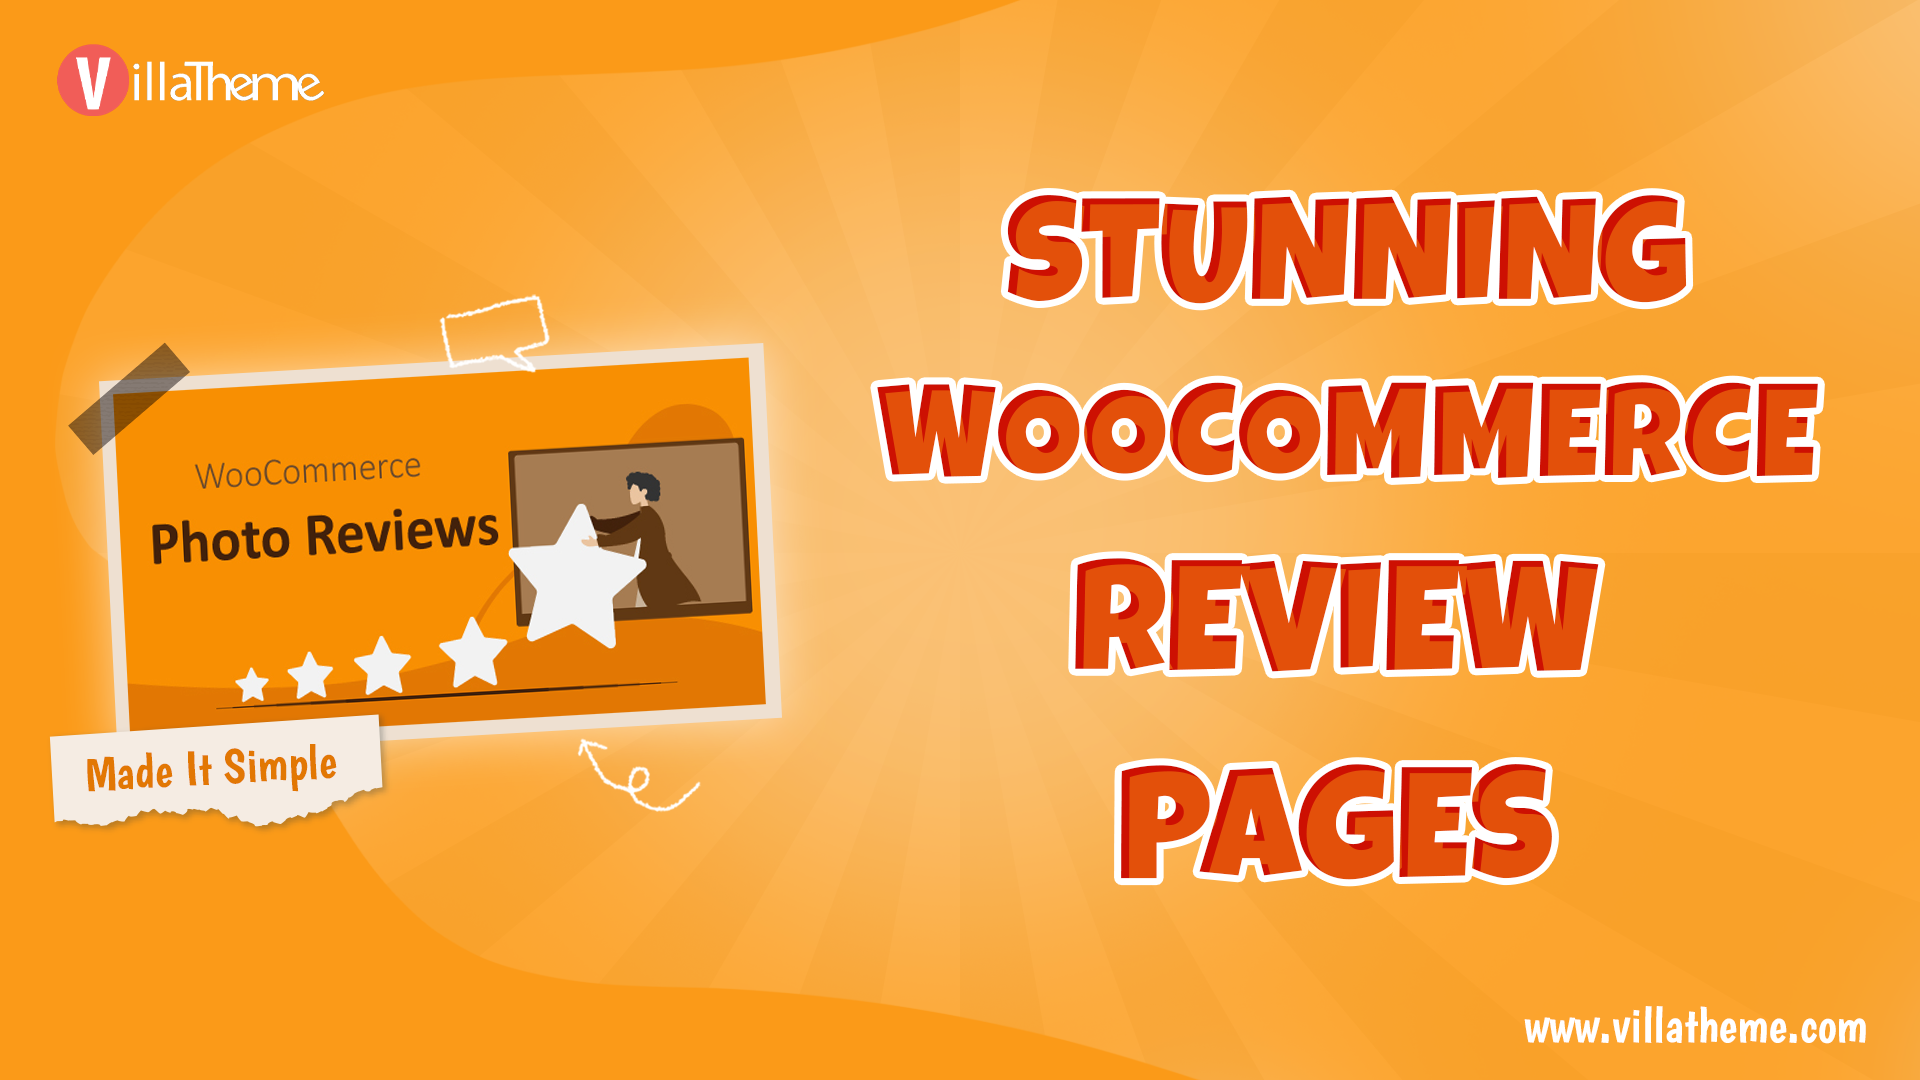 Stunning WooCommerce Reviews page